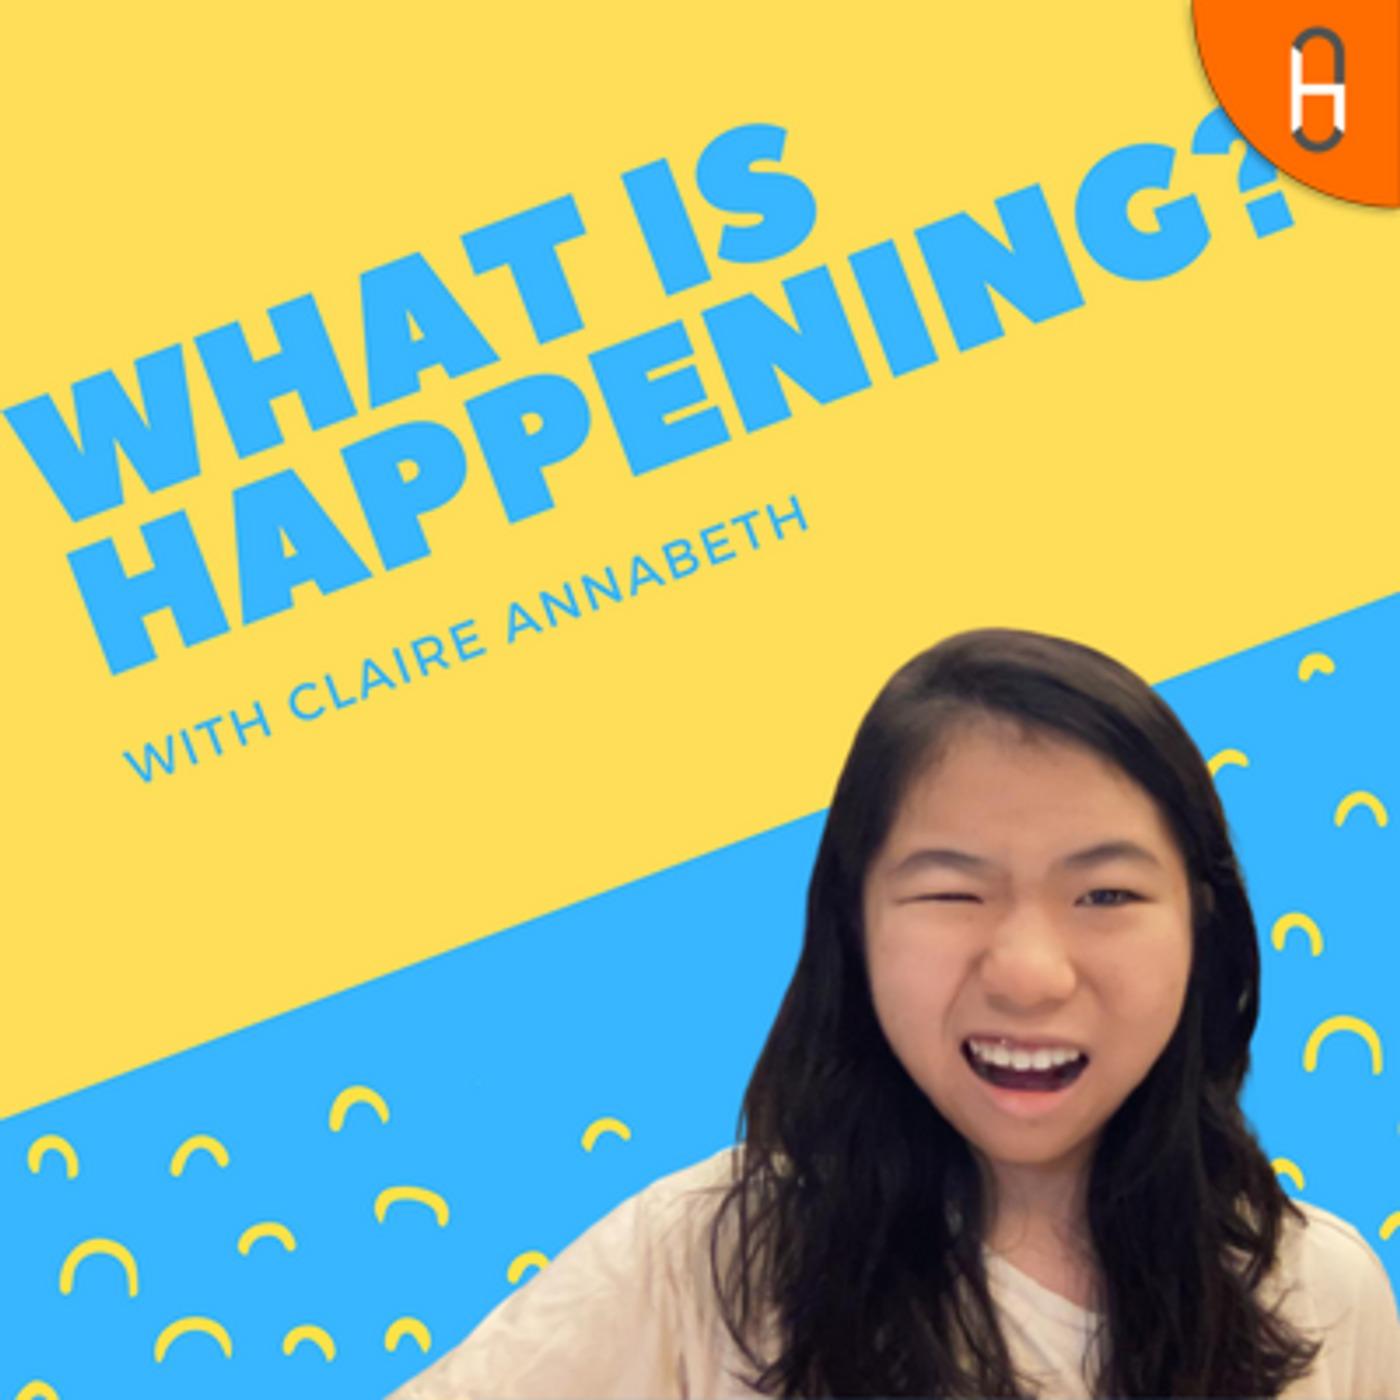 What is Happening? With Claire Annabeth